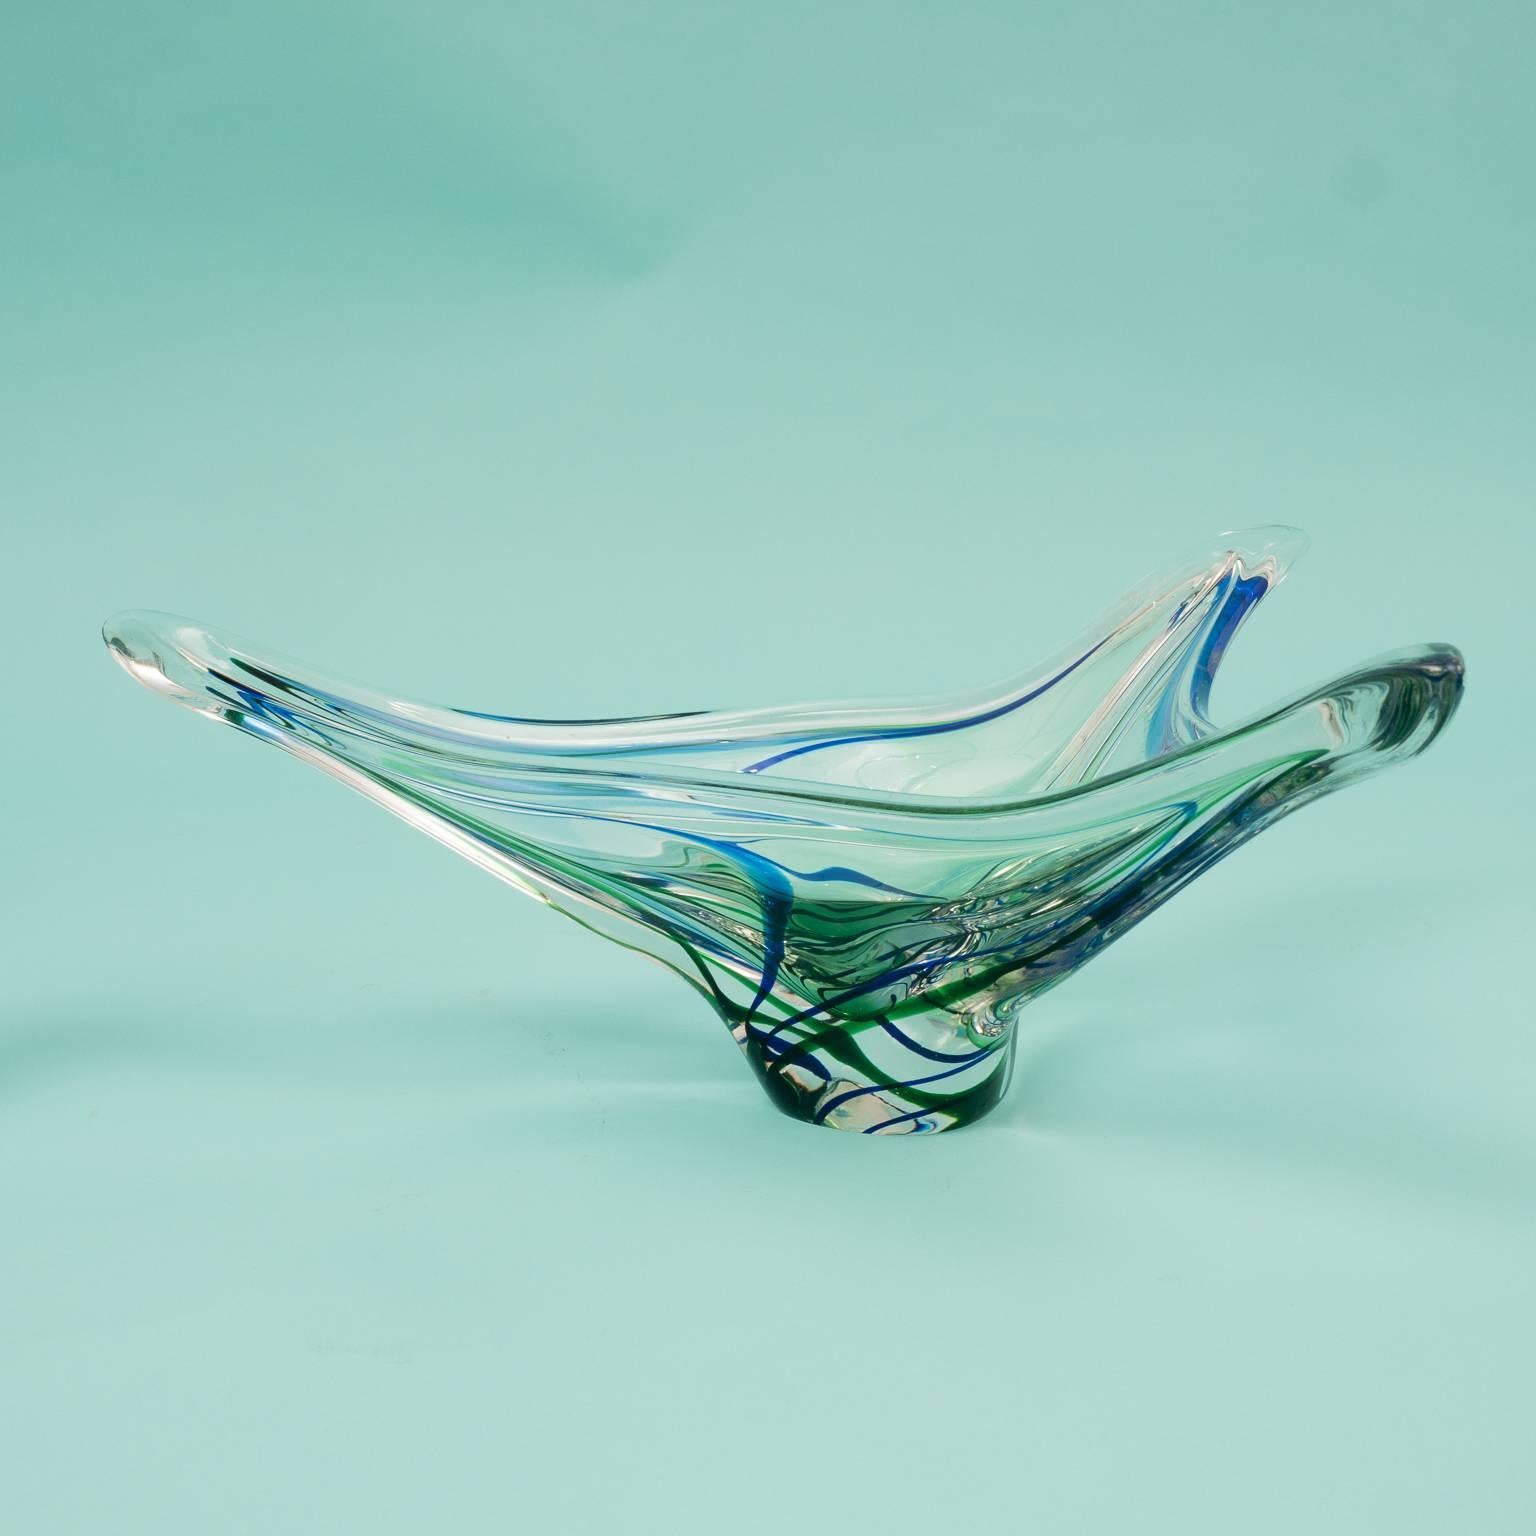 Dutch Bicolored 1960s Glass Bowl by Kristalunie Maastricht For Sale